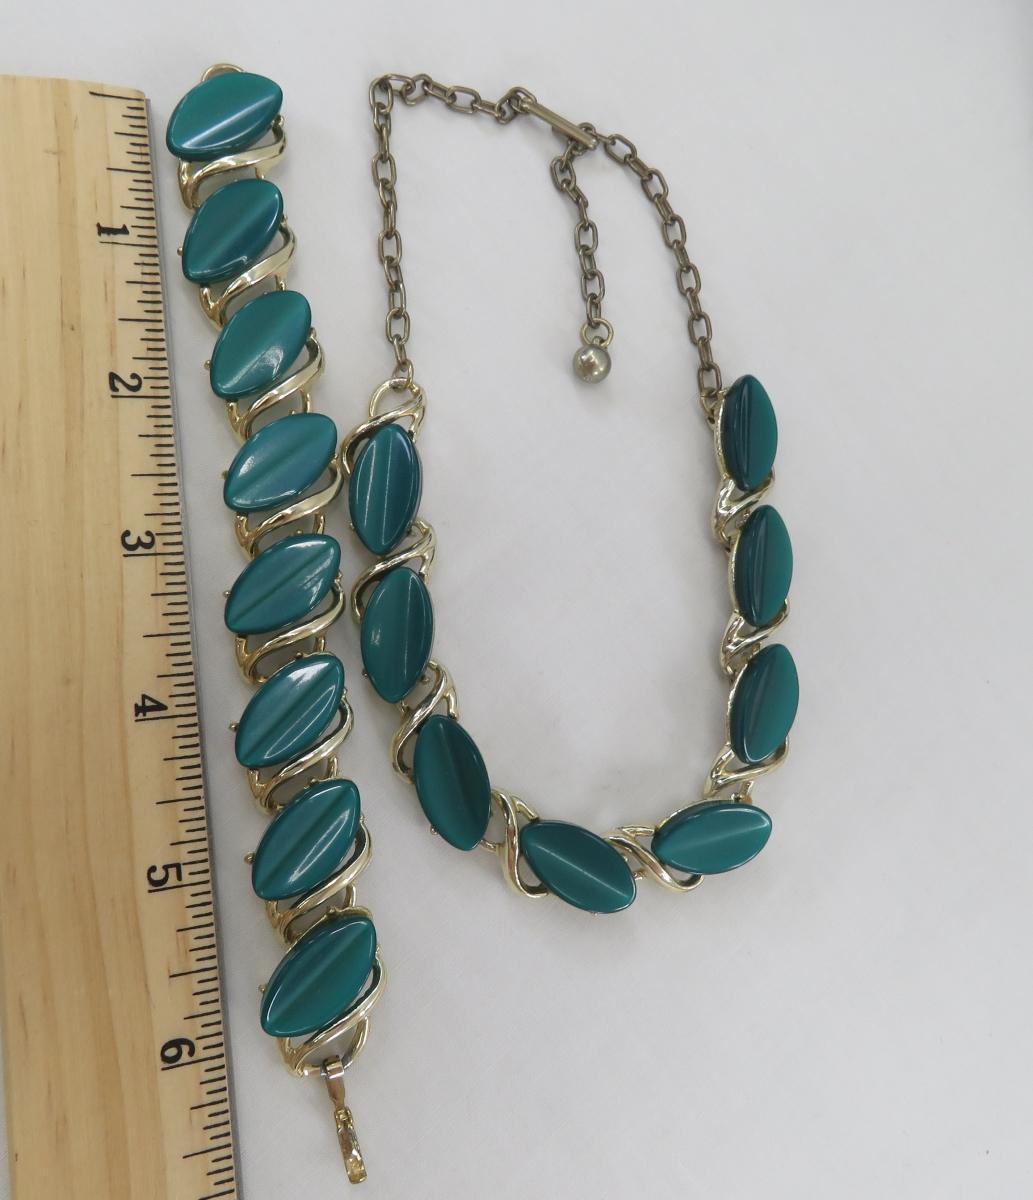 Vintage Thermoset & Christmas Jewelry - some sets